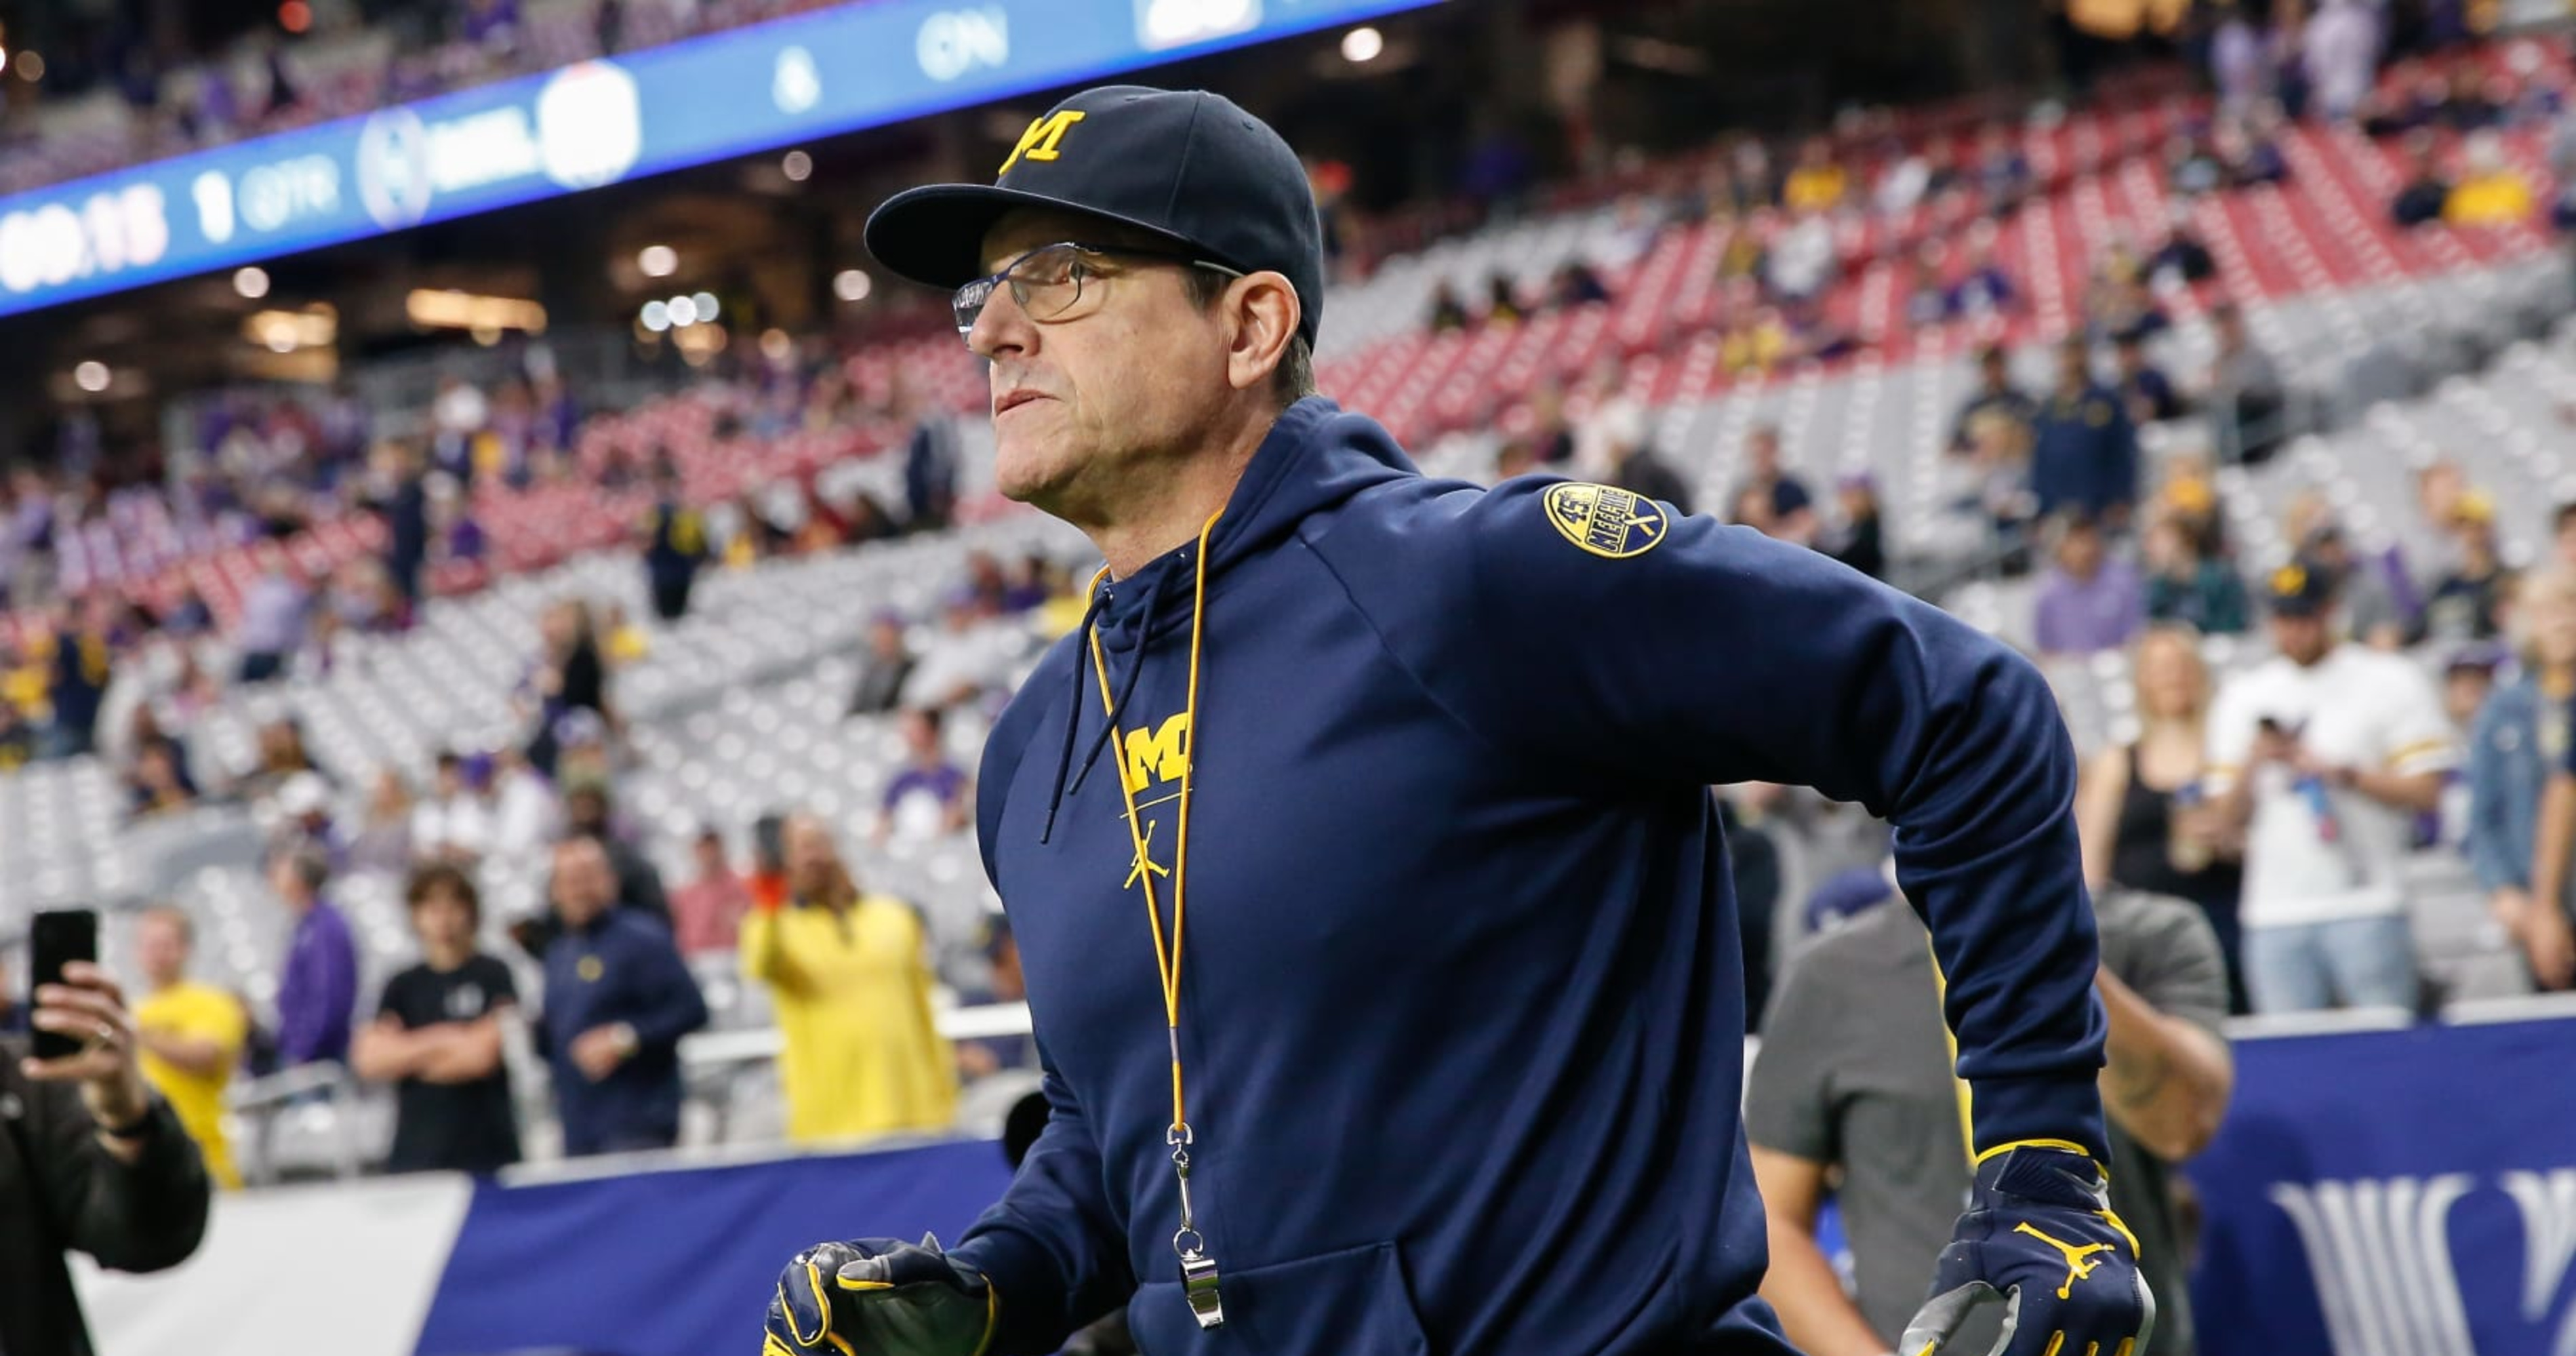 Jim Harbaugh Addresses NFL Rumors, Says He Expects to Return to Michigan in 2023